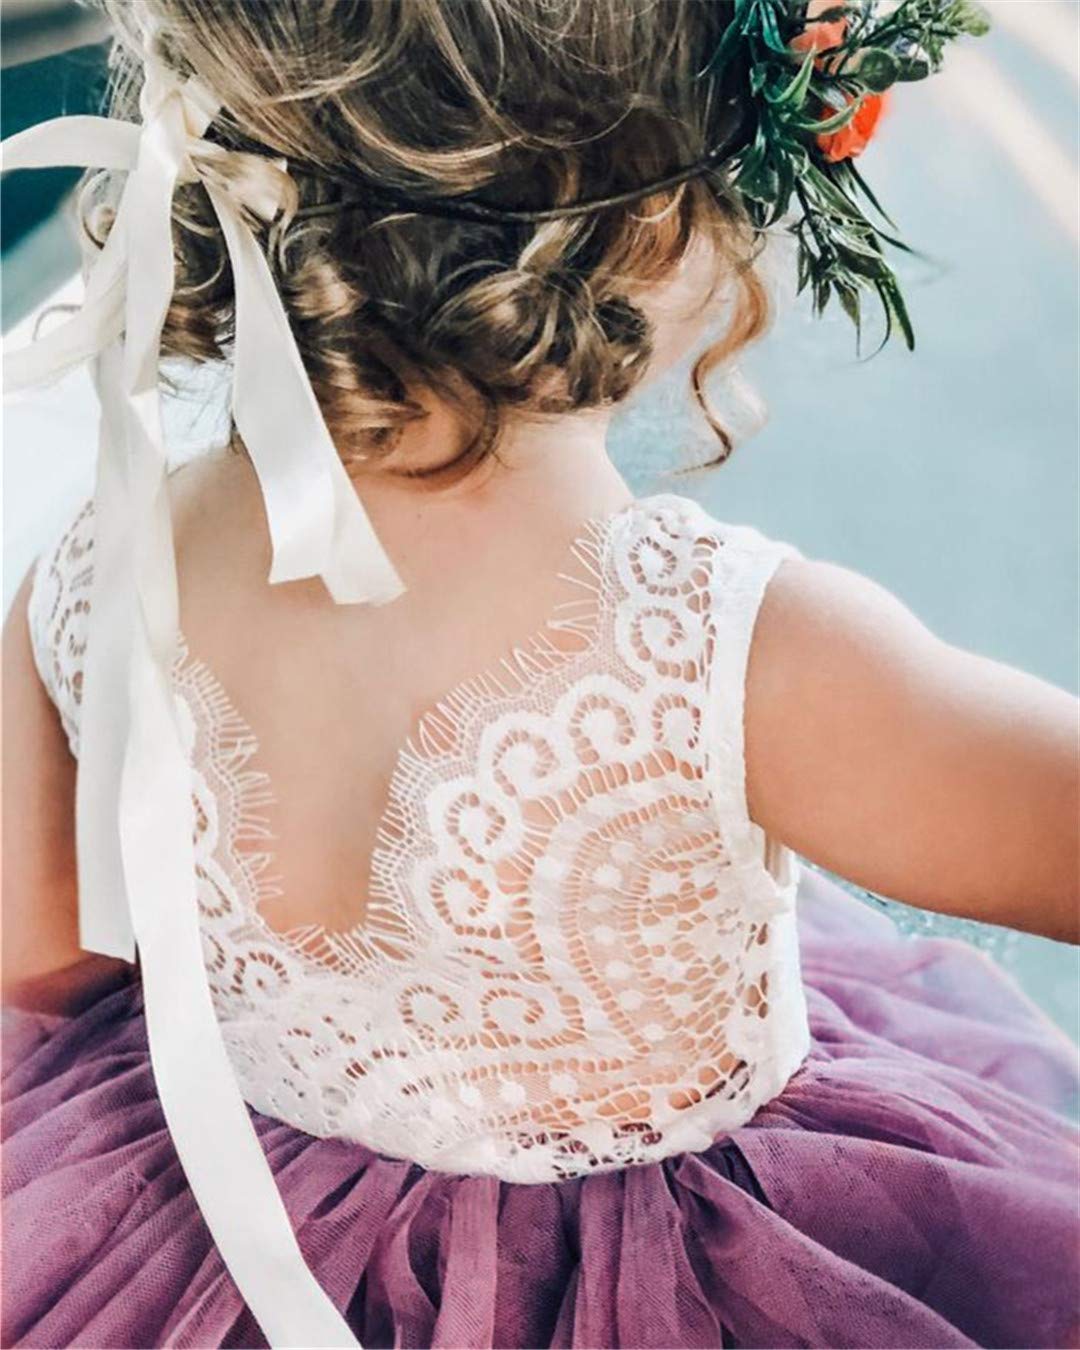 2Bunnies Flower Girl Dress Peony Lace Back A-Line Sleeveless Tiered Tulle Short (Mauve) - 2BUNNIES